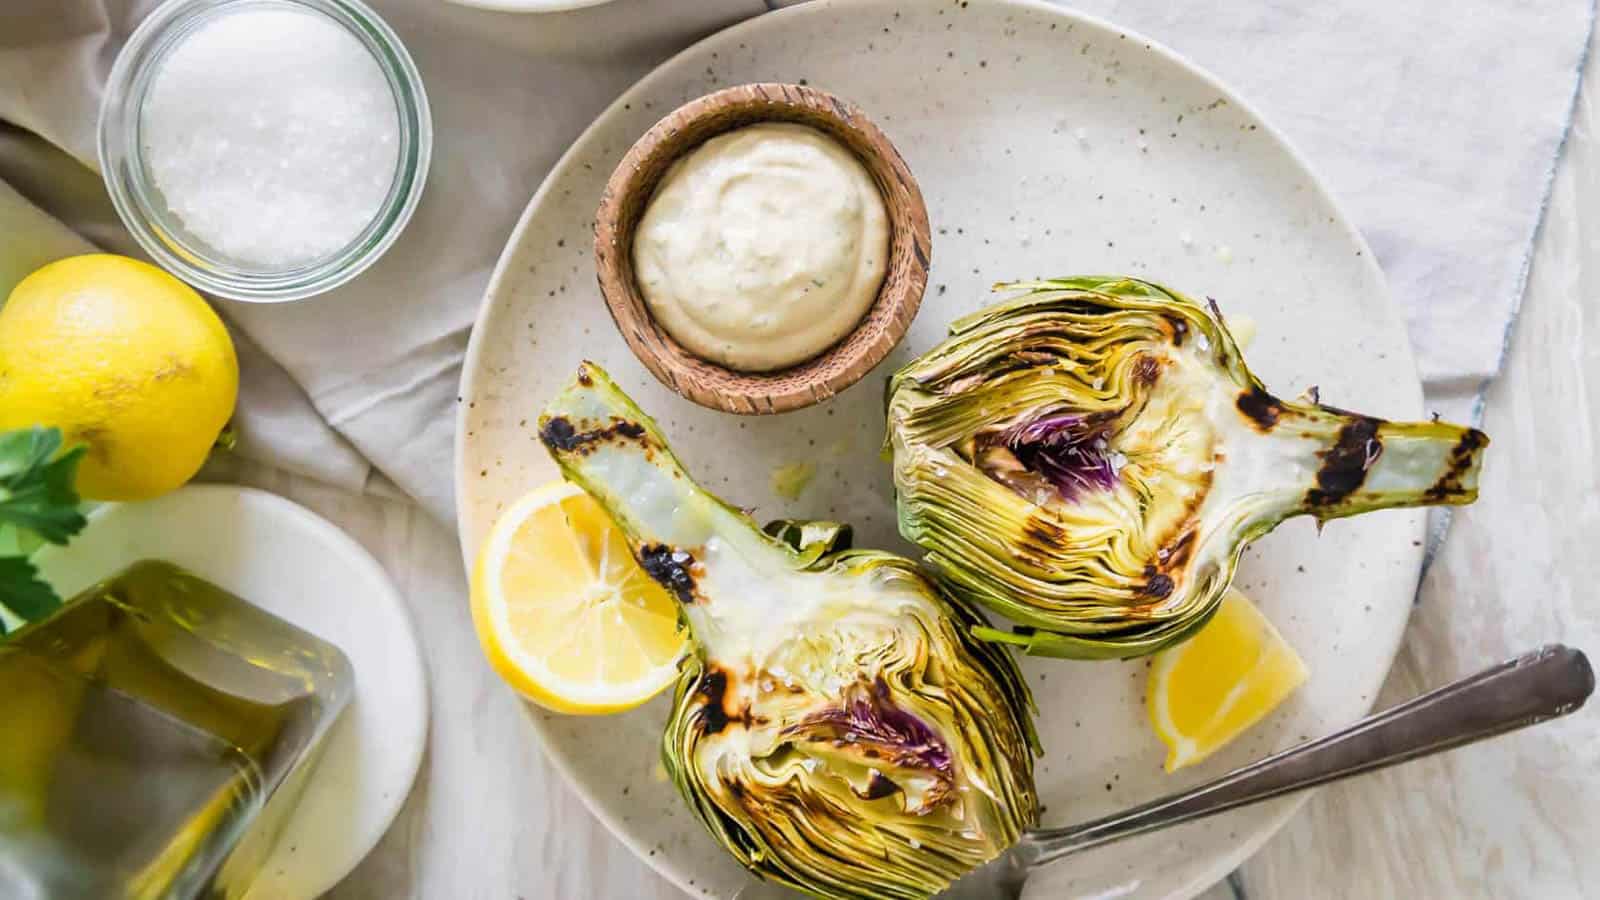 Grilled artichokes on a plate with dipping sauce and lemon.